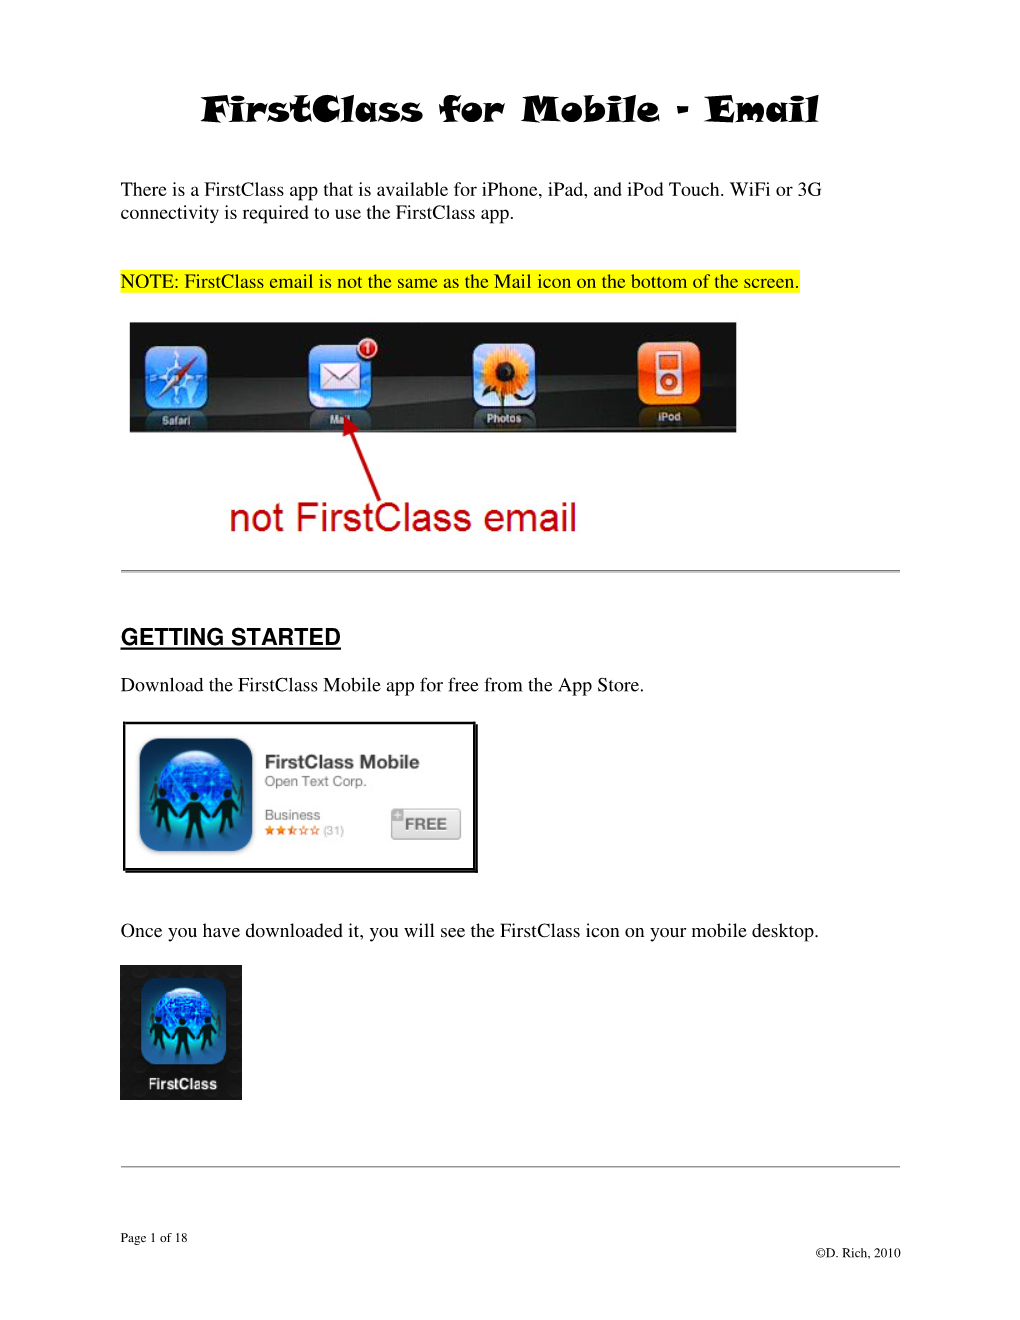 Firstclass for Mobile - Email